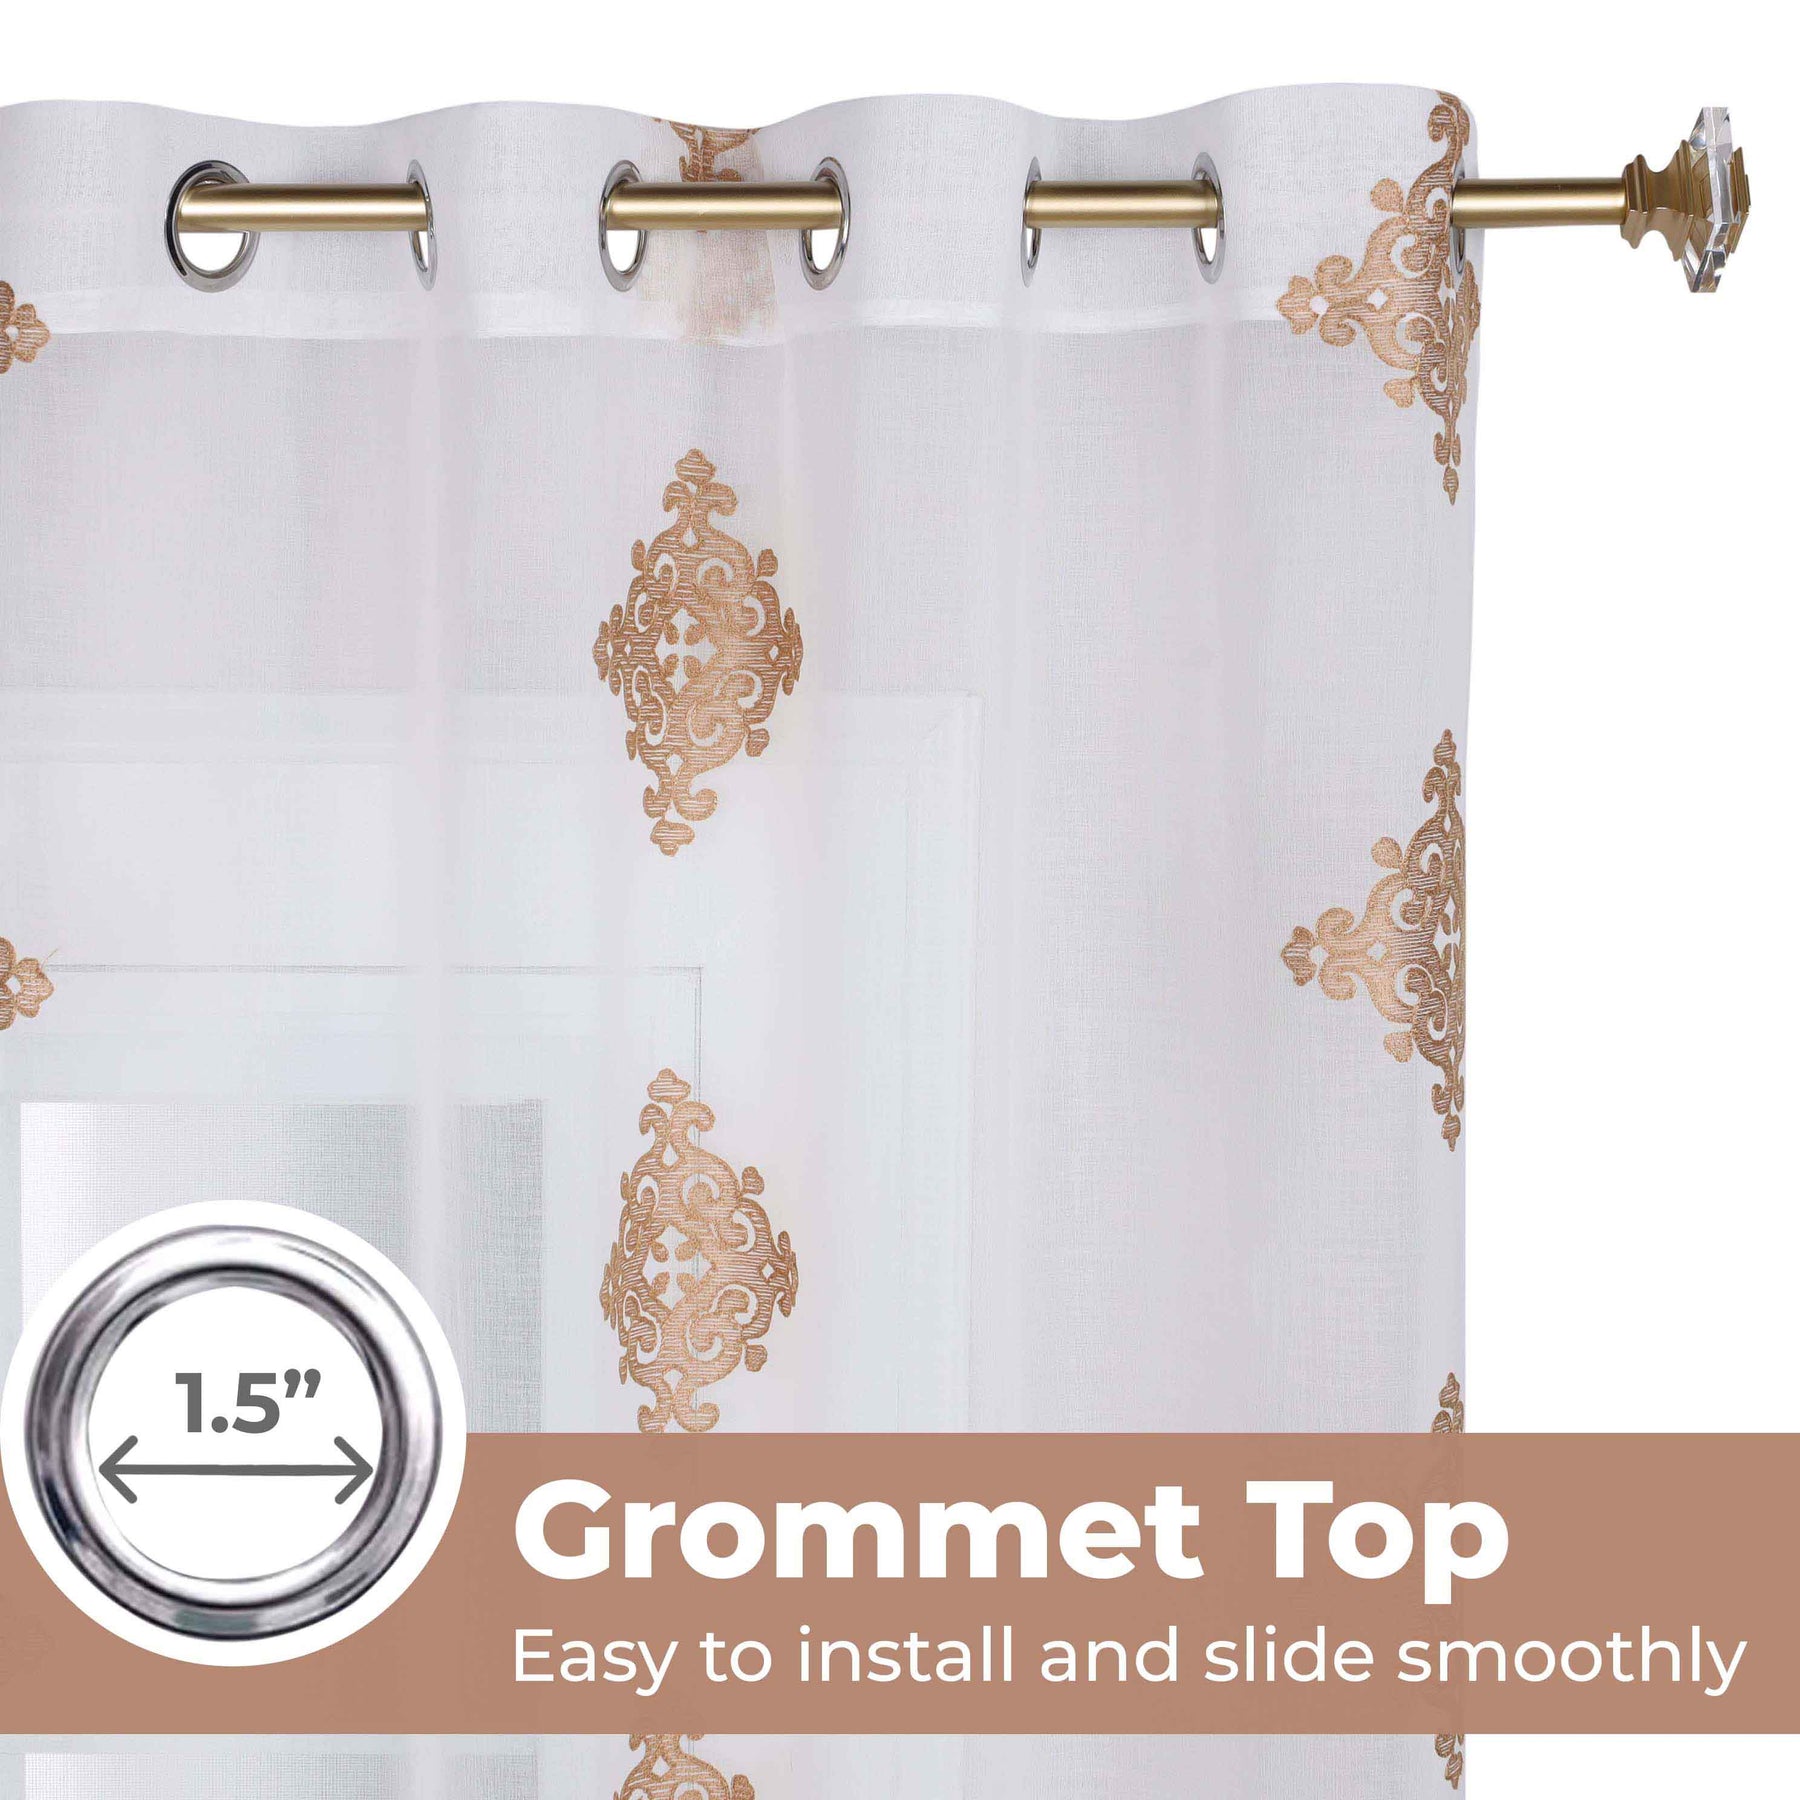 Sheer Traditional Embroidered Damask Grommet Curtain Panel Set - Gold